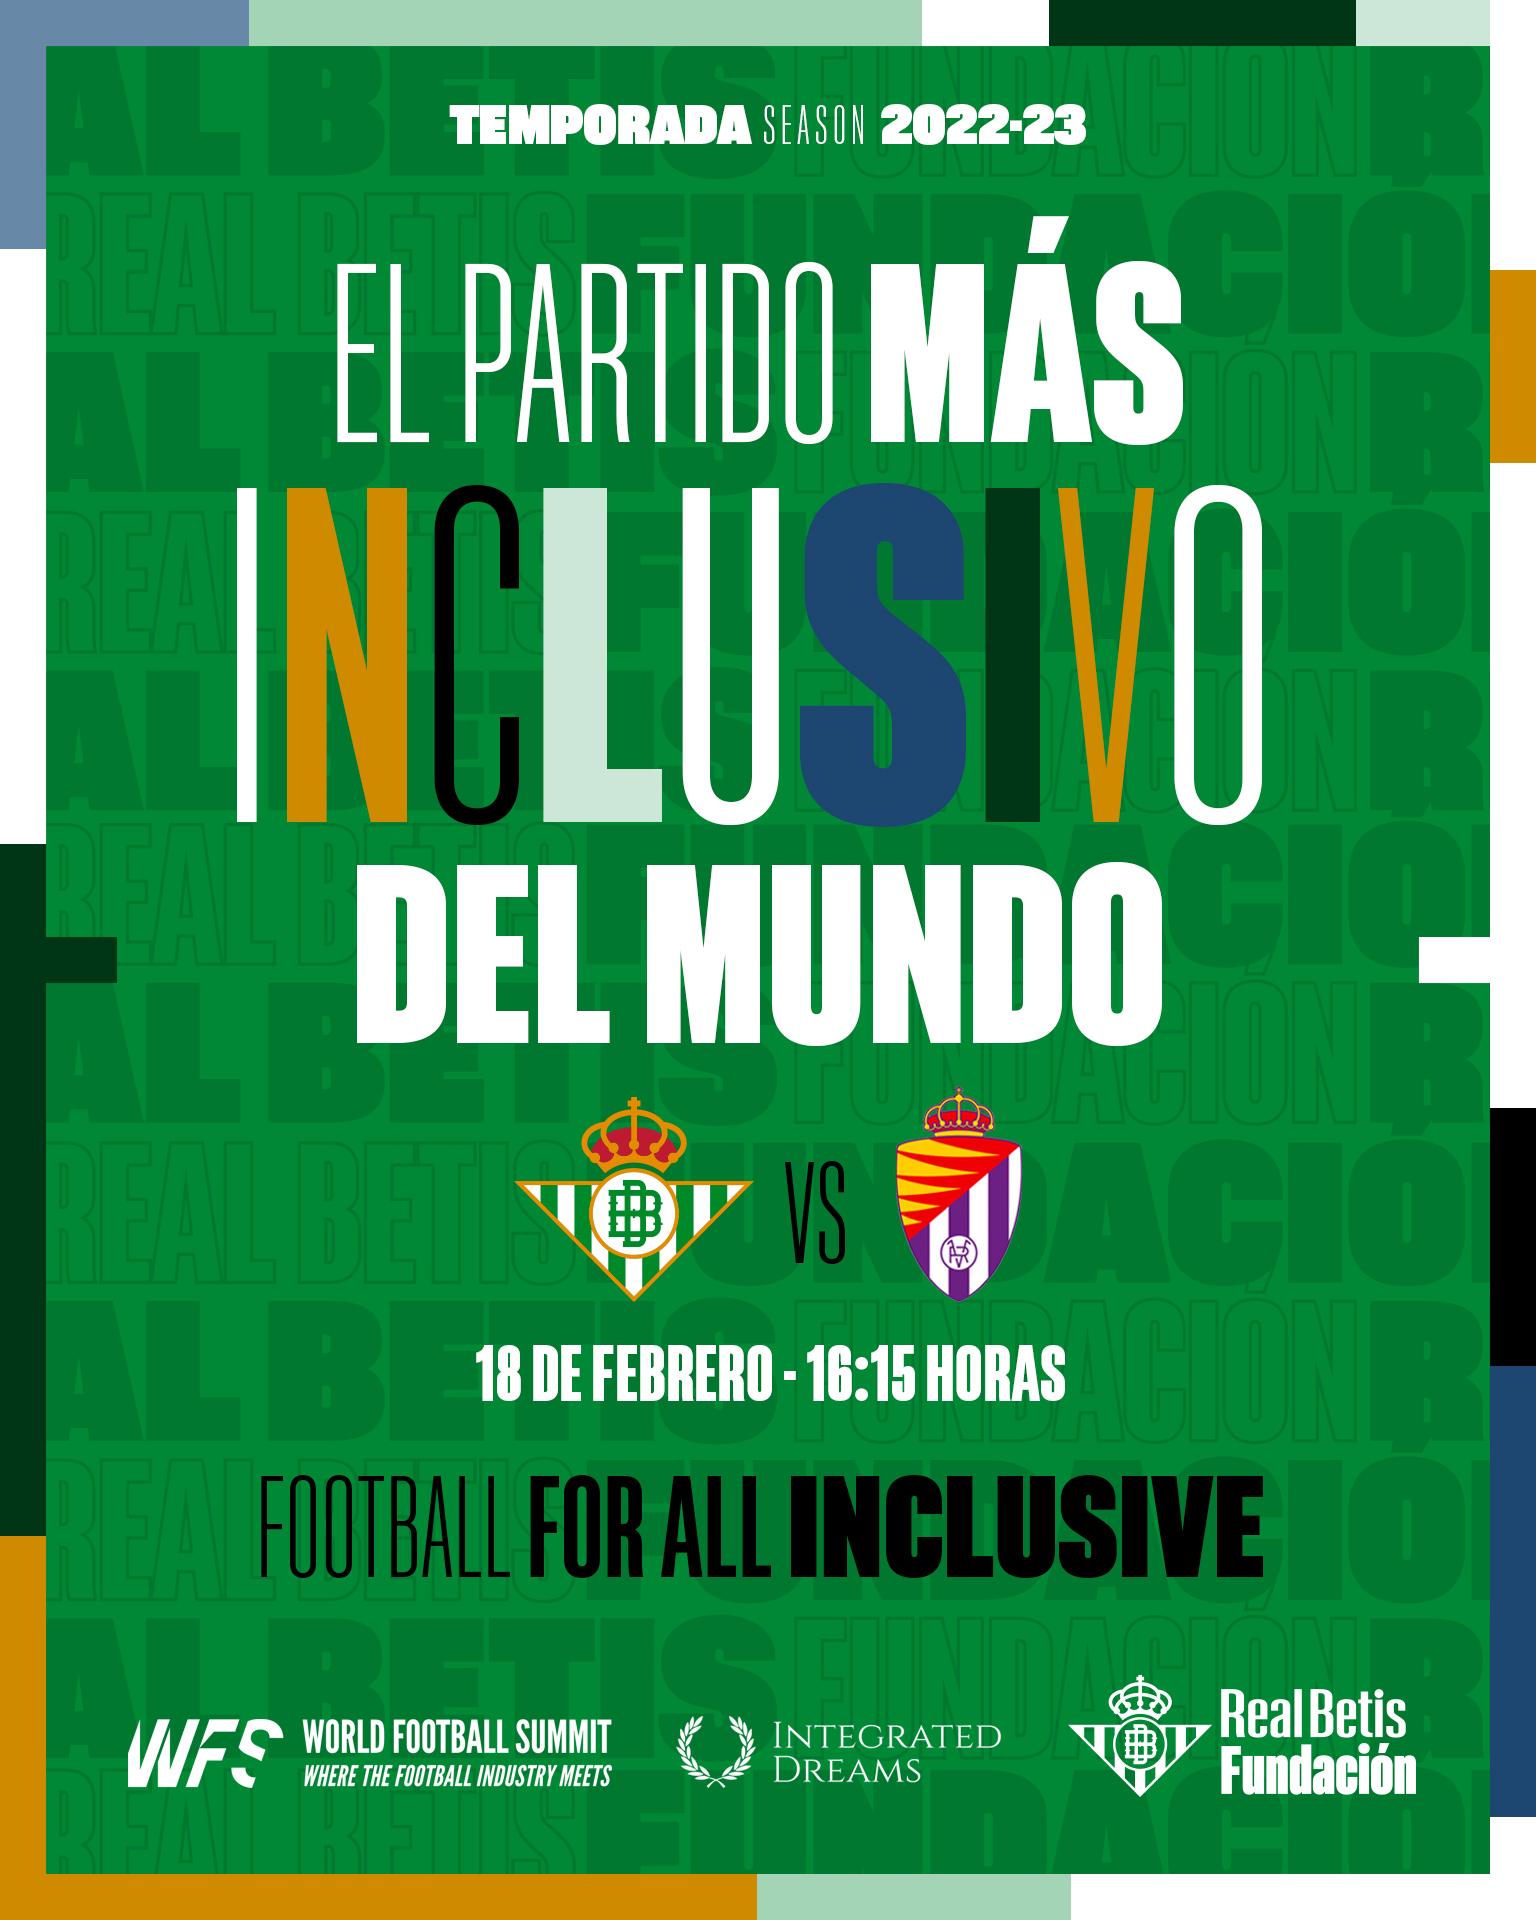 inclusivity initiative by Real Betis, World Football Summit and Integrated Dreams